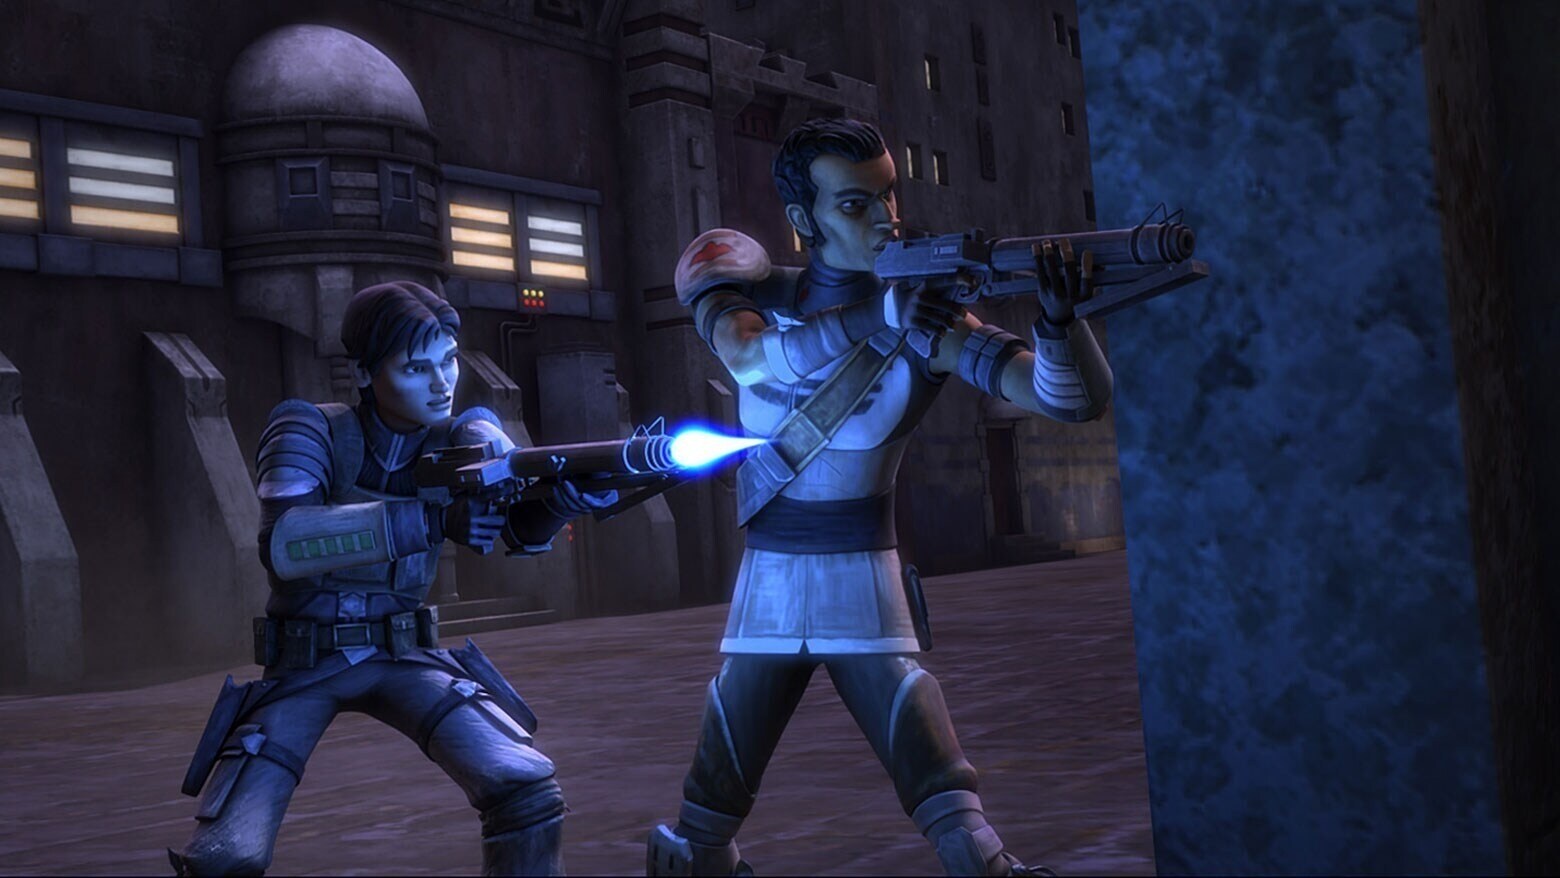 Lux and Saw aiming blasters in The Clone Wars